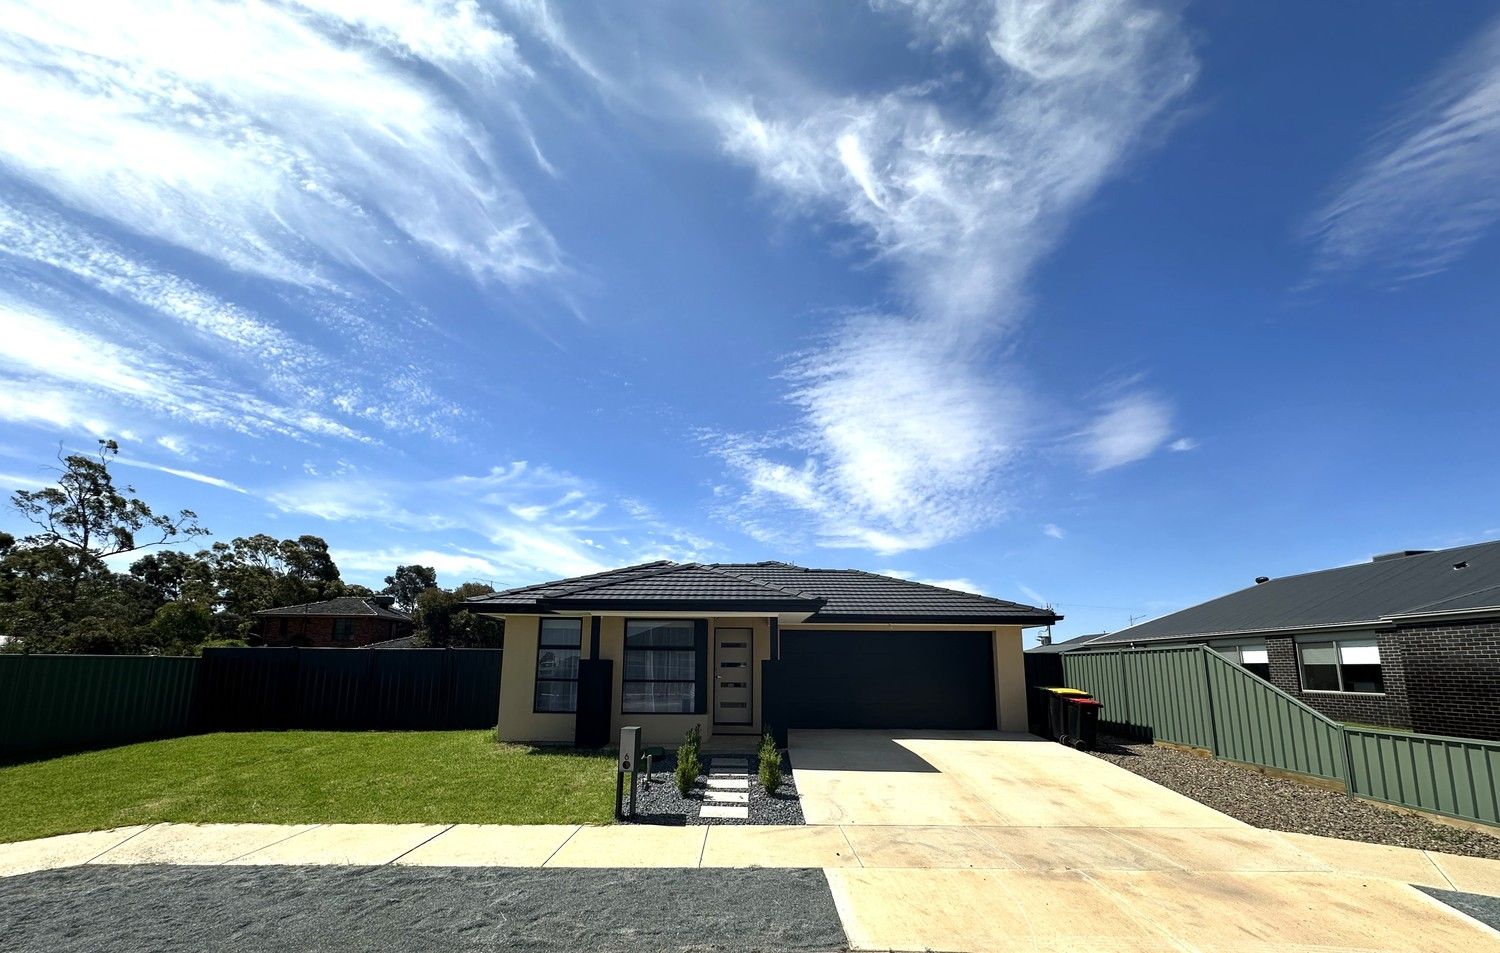 3 bedrooms House in 6 Cabernet Street KIALLA VIC, 3631